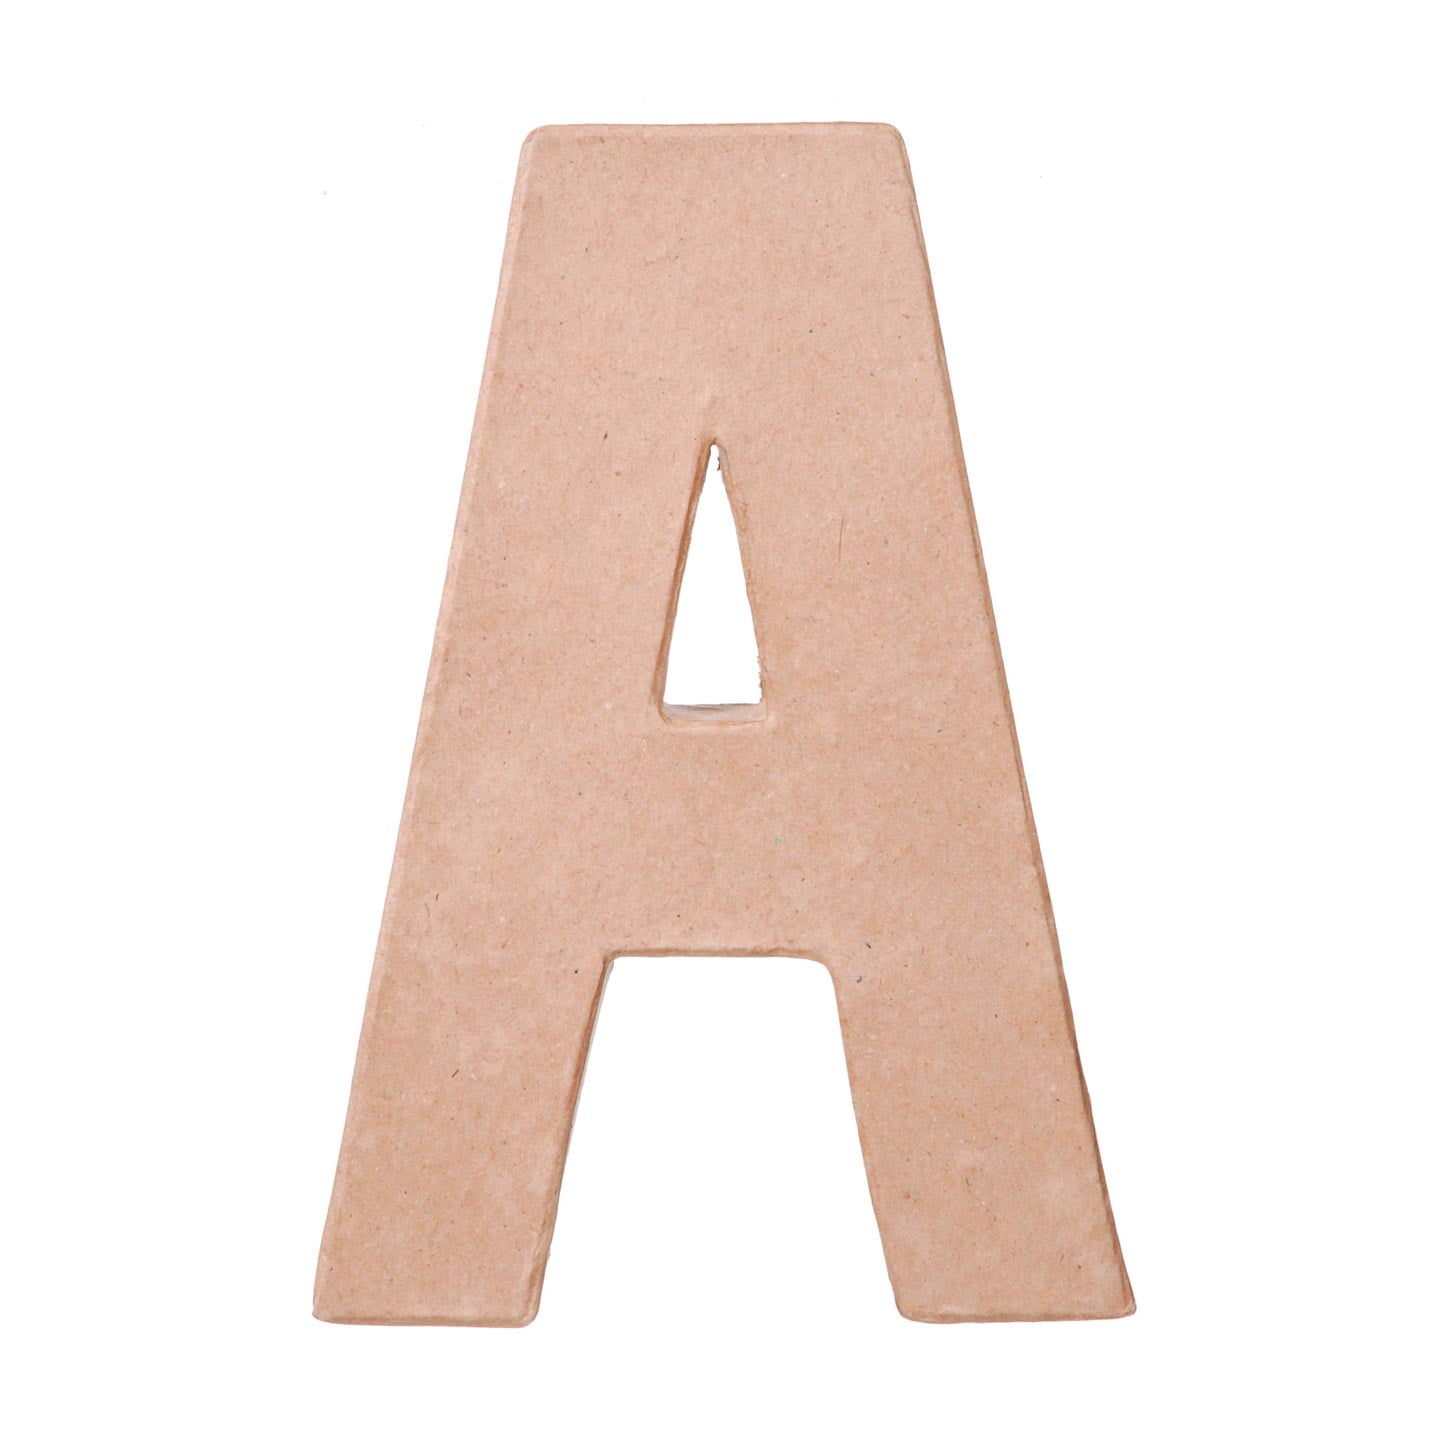 Paper Mache Letter S 8 X 5.5 Inches 2 Pack